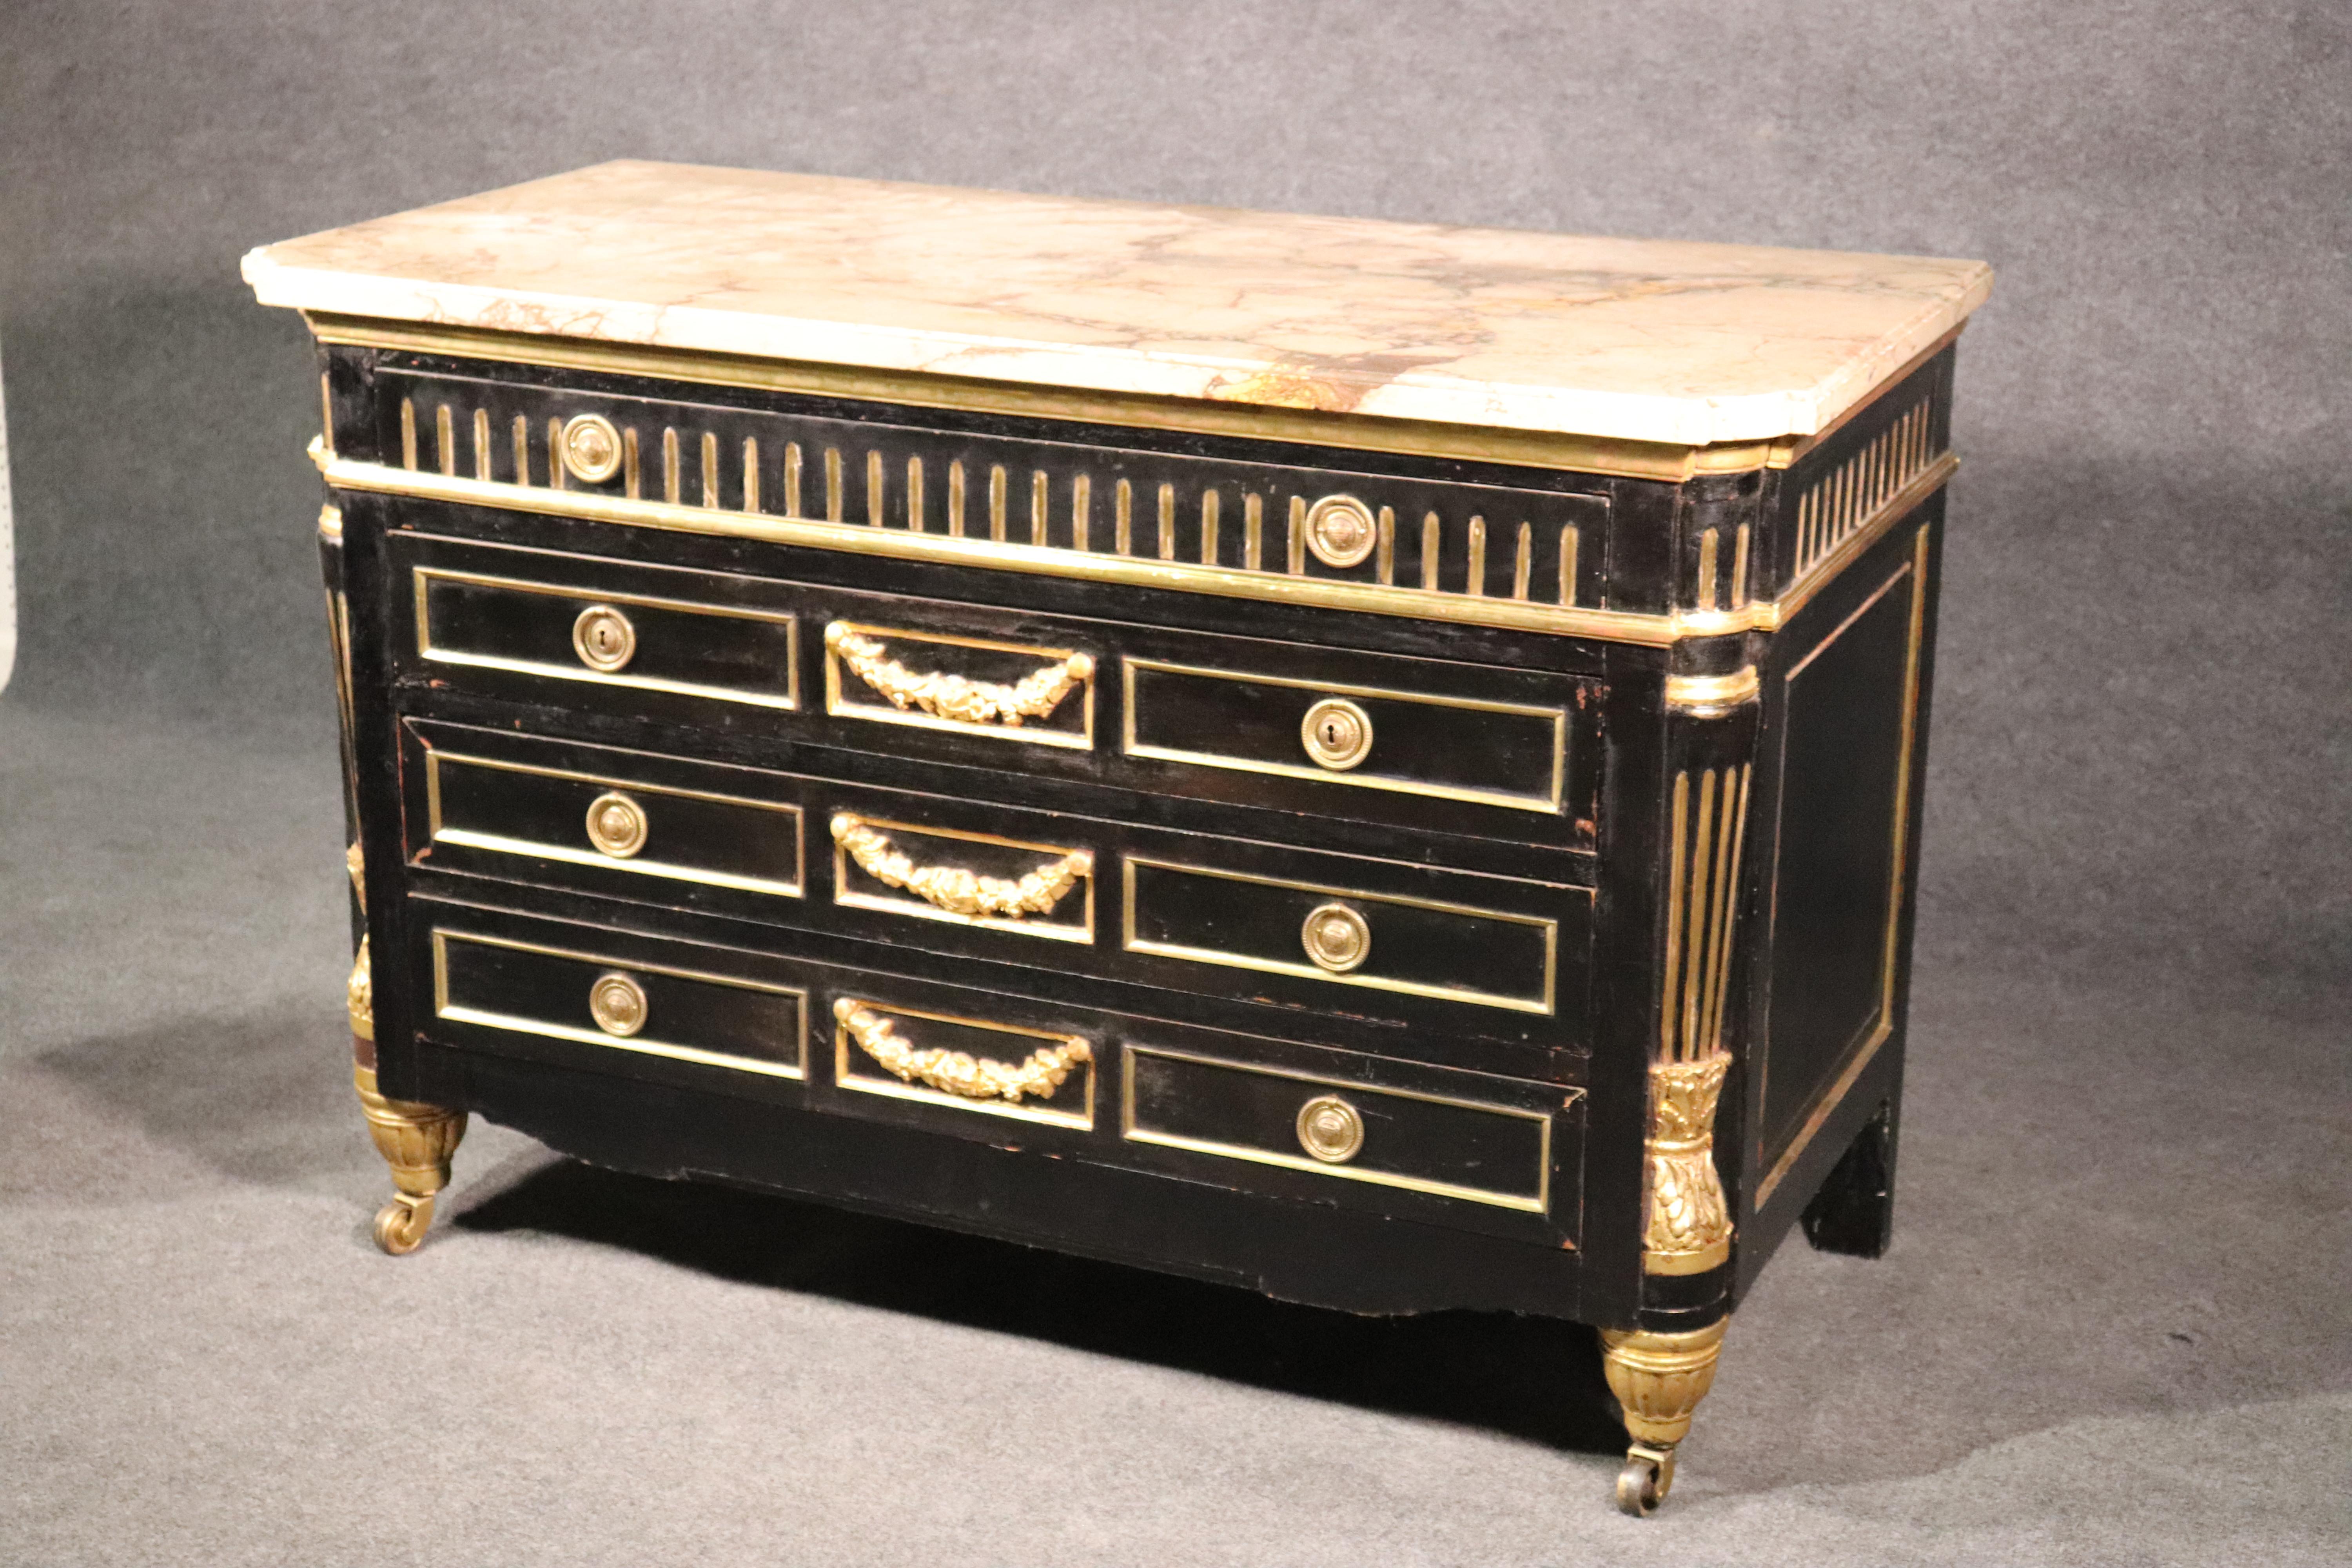 This is a massive and beautifully designed Russian 1870s commode. Dressed in fine water-gilded carved details and a fantastic marble top, this incredible commode measures 52 wide x 25 deep x 35 tall. There are keyholes but no locks were ever in